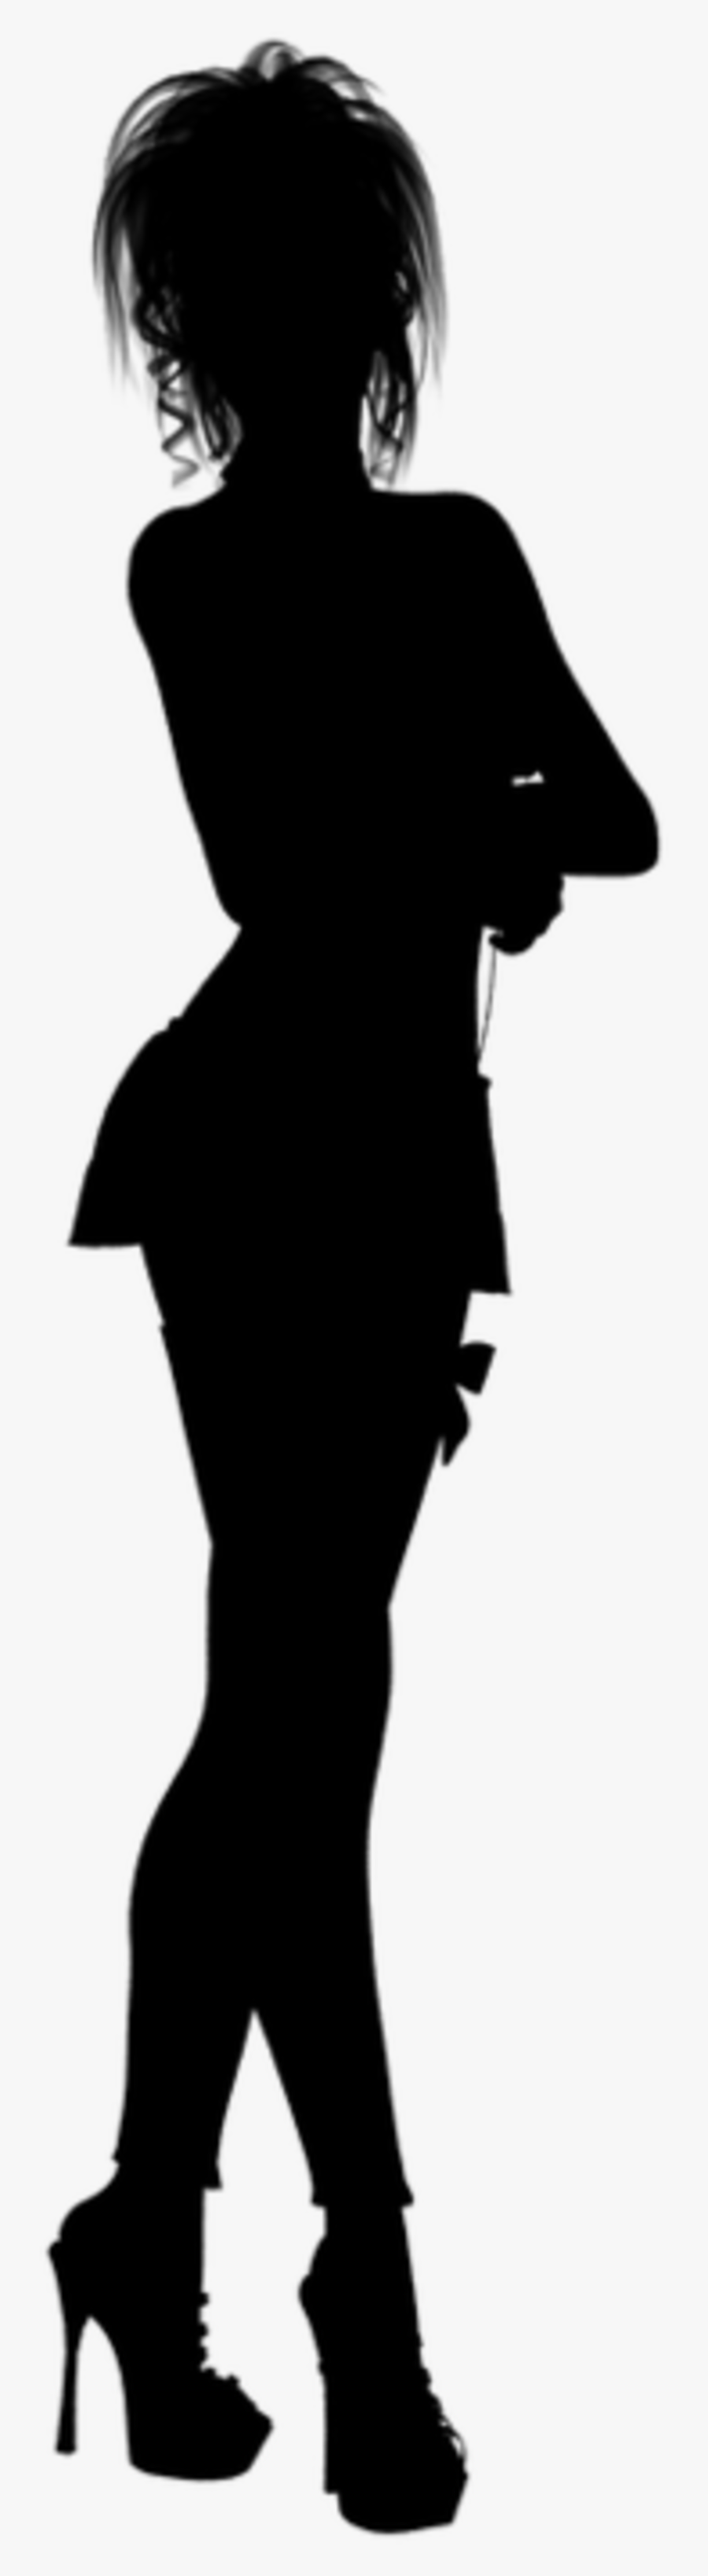 Chimney Sweep Clipart , Png Download - Chimney Sweep Silhouette Png, Transparent Clipart